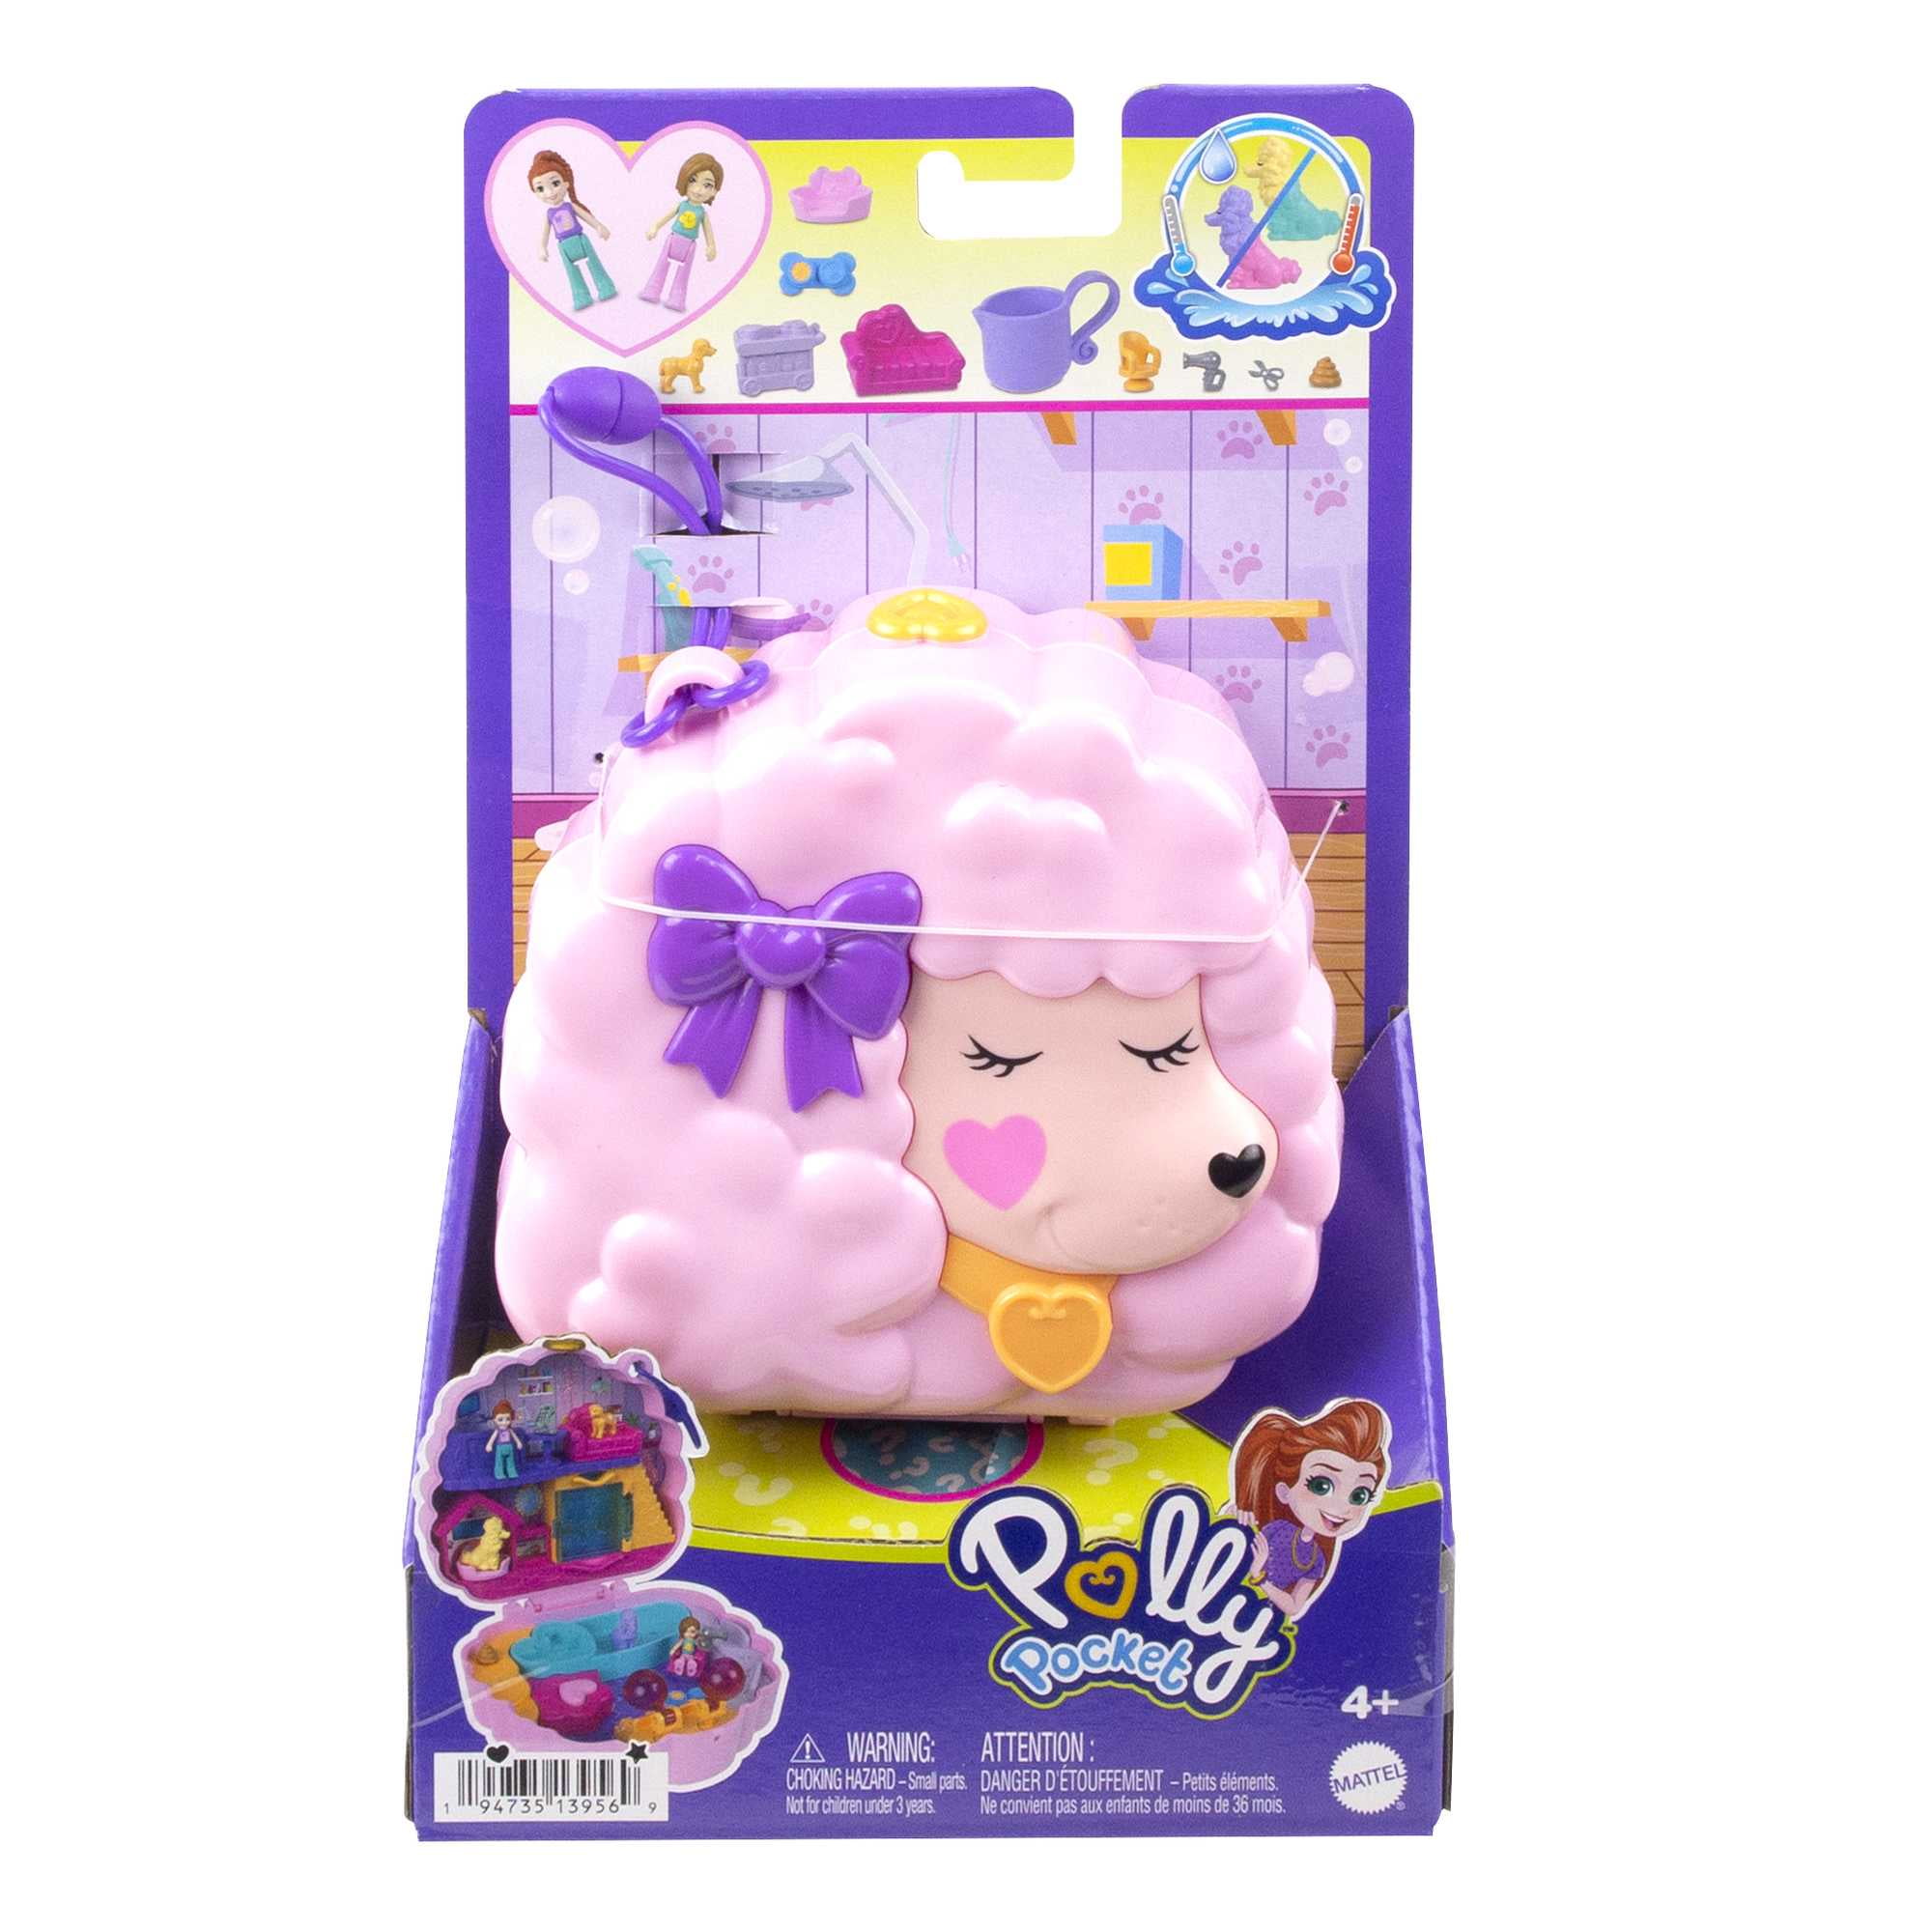 Polly Pocket Groom & Glam Poodle Compact Playset with 2 Micro